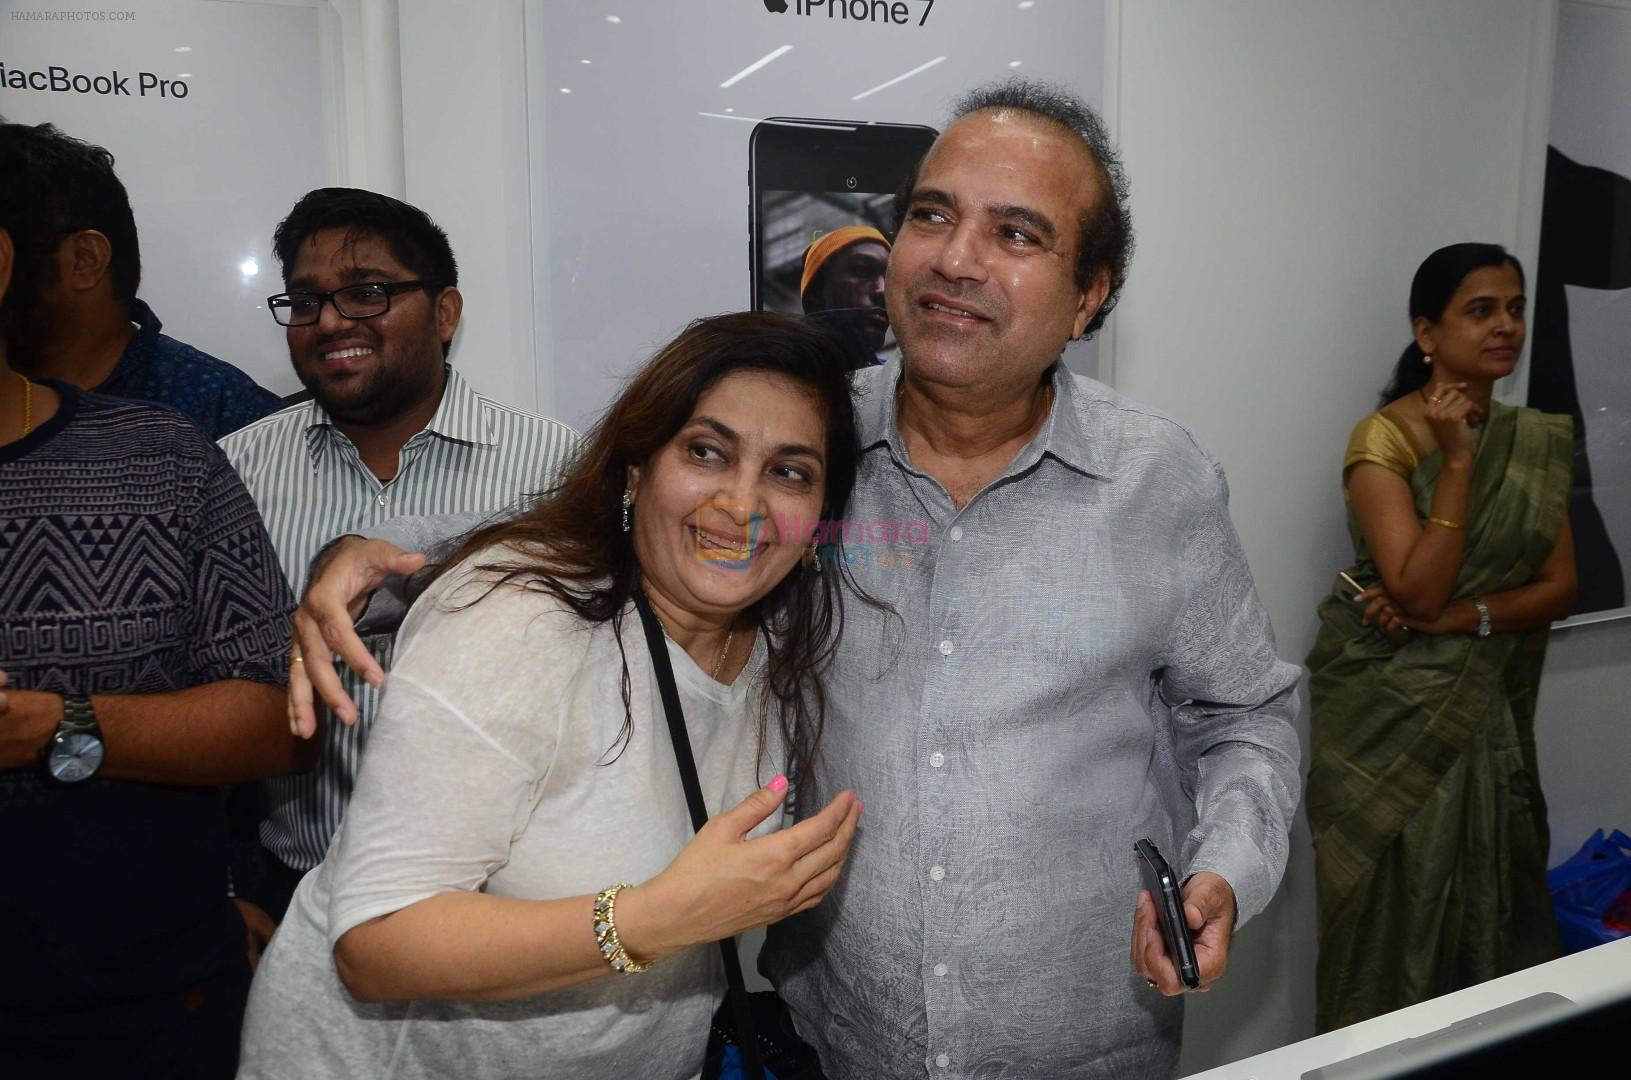 Suresh Wadkar at the Launch OF Zanai Bhosle's iAzure, Apple Store on 30th July 2017